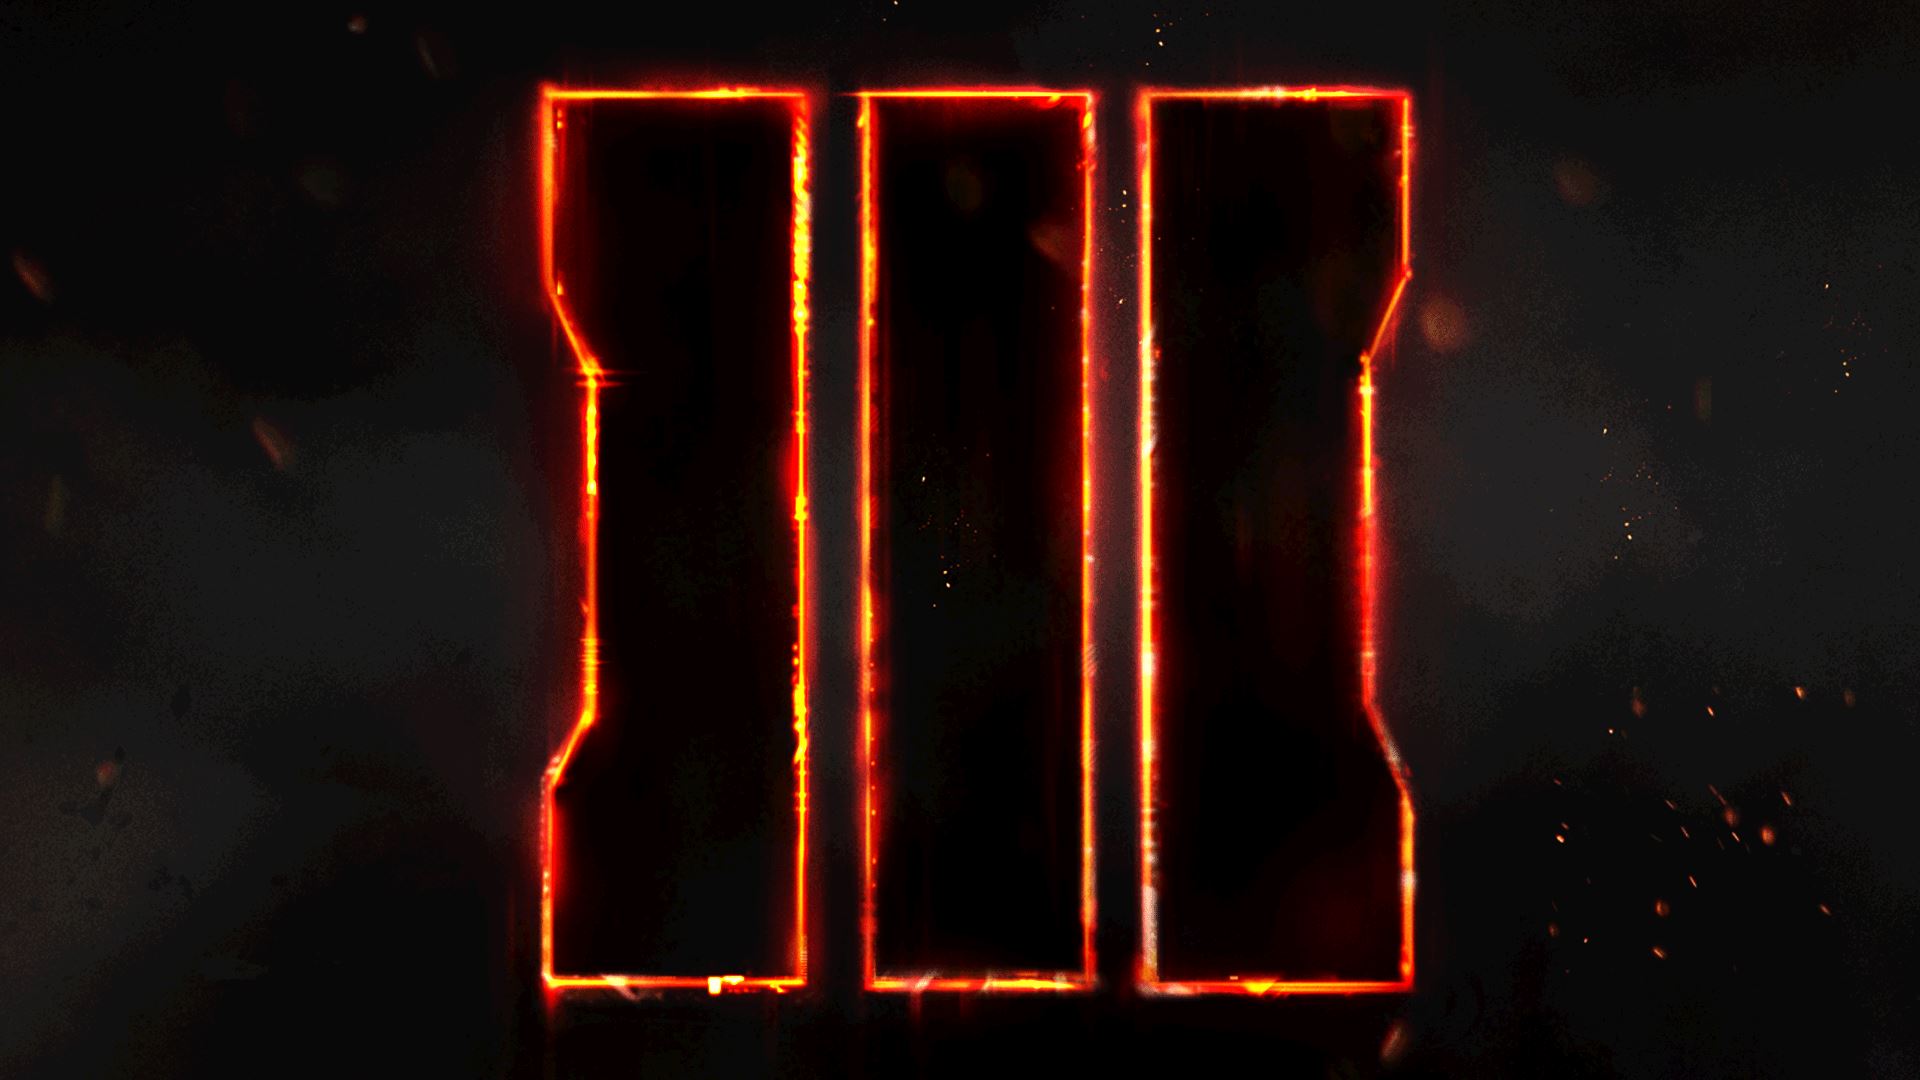 Call of Duty Black Ops III Digital Deluxe Edition